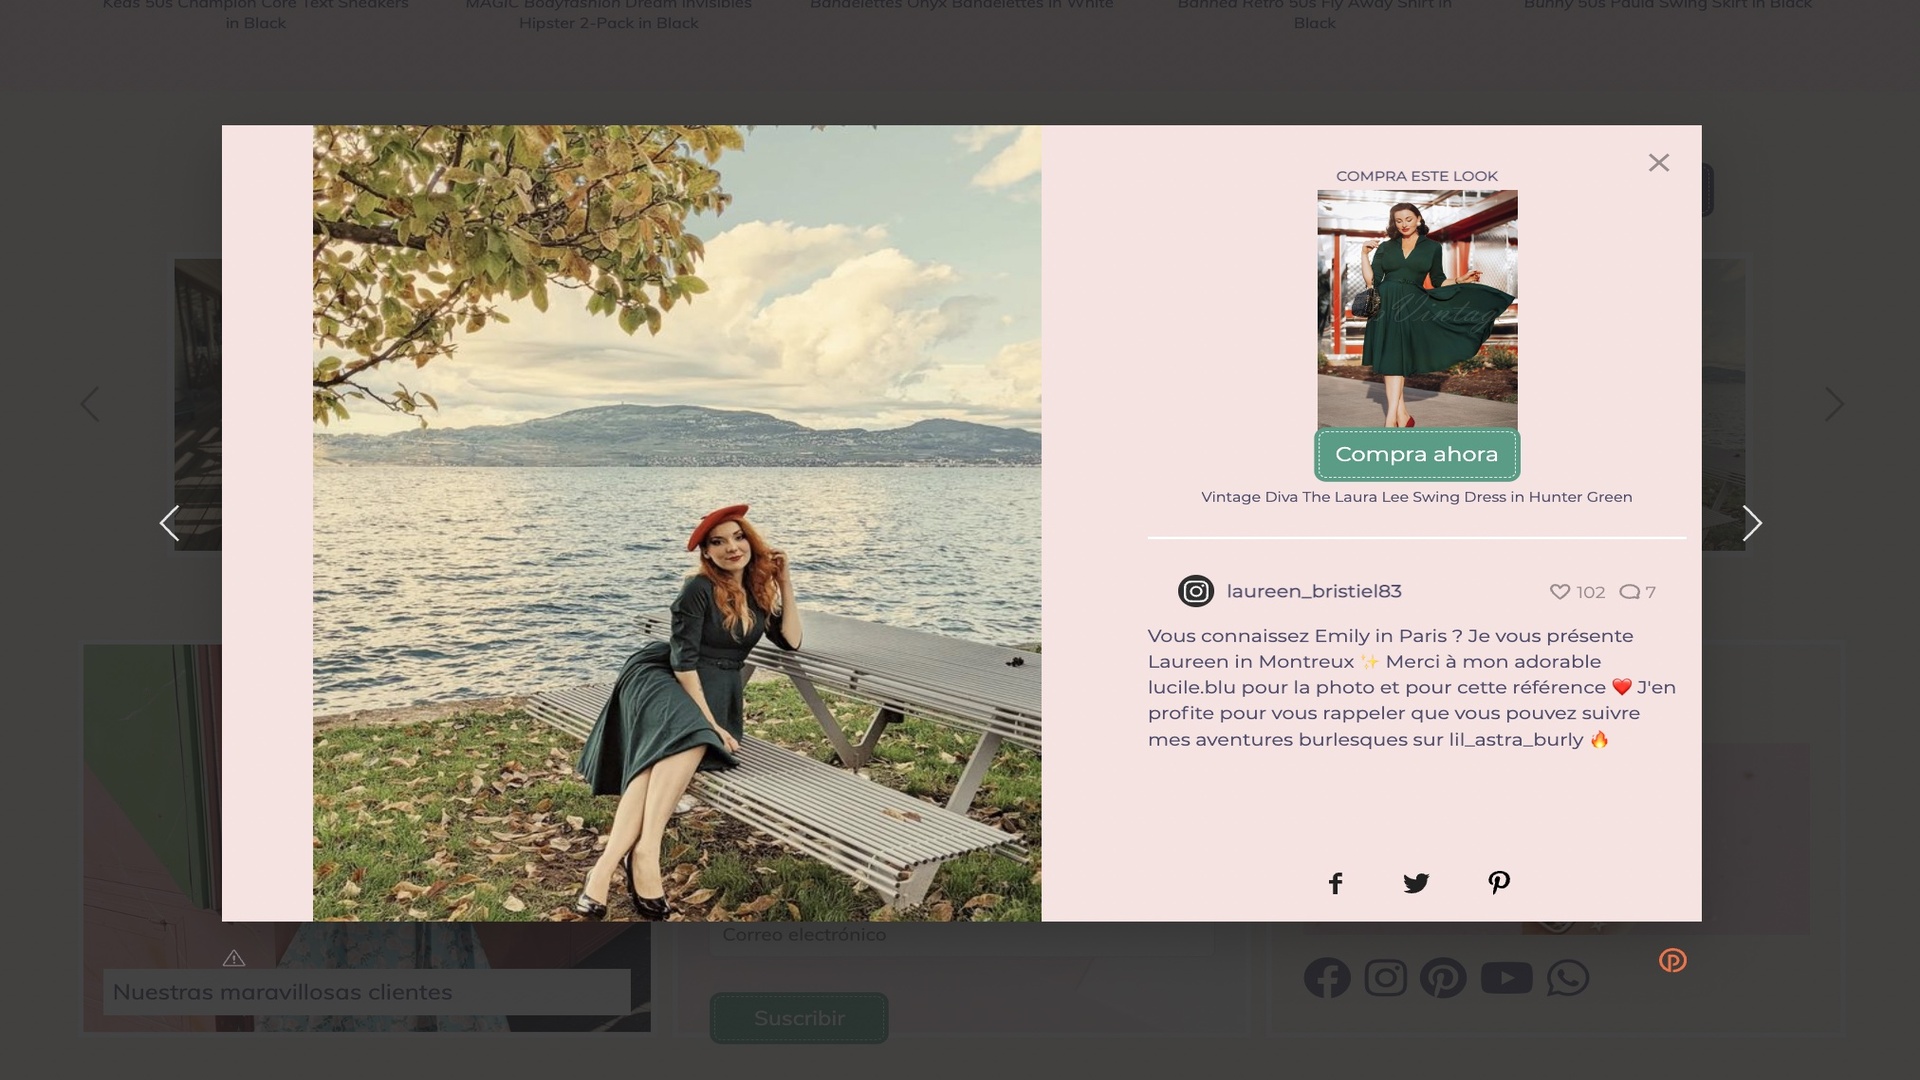 How TopVintage encouraged their community to post 7,000 user generated images